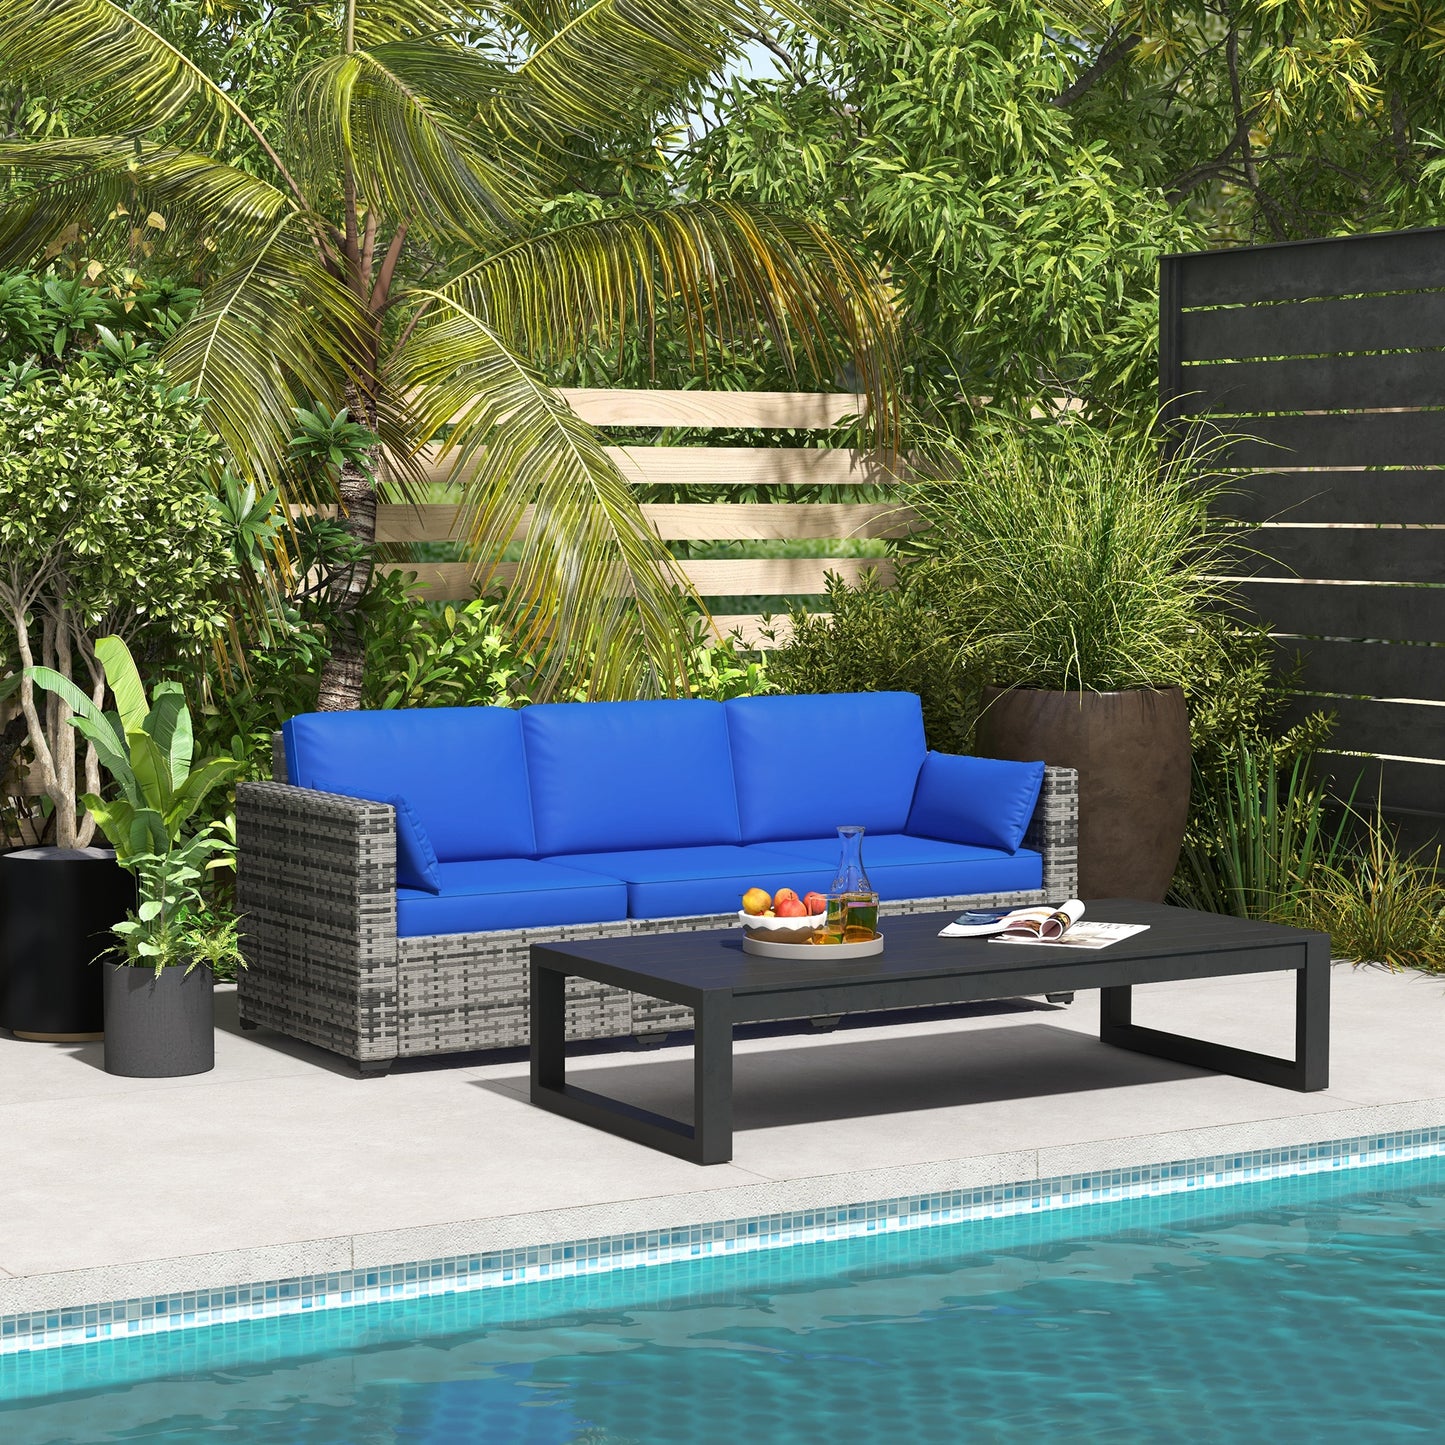 Outsunny Three-Seater Outdoor Sofa with Cushions, PE Rattan Conversation Patio Couch with Pillows for Conservatory, Garden, Poolside, Blue